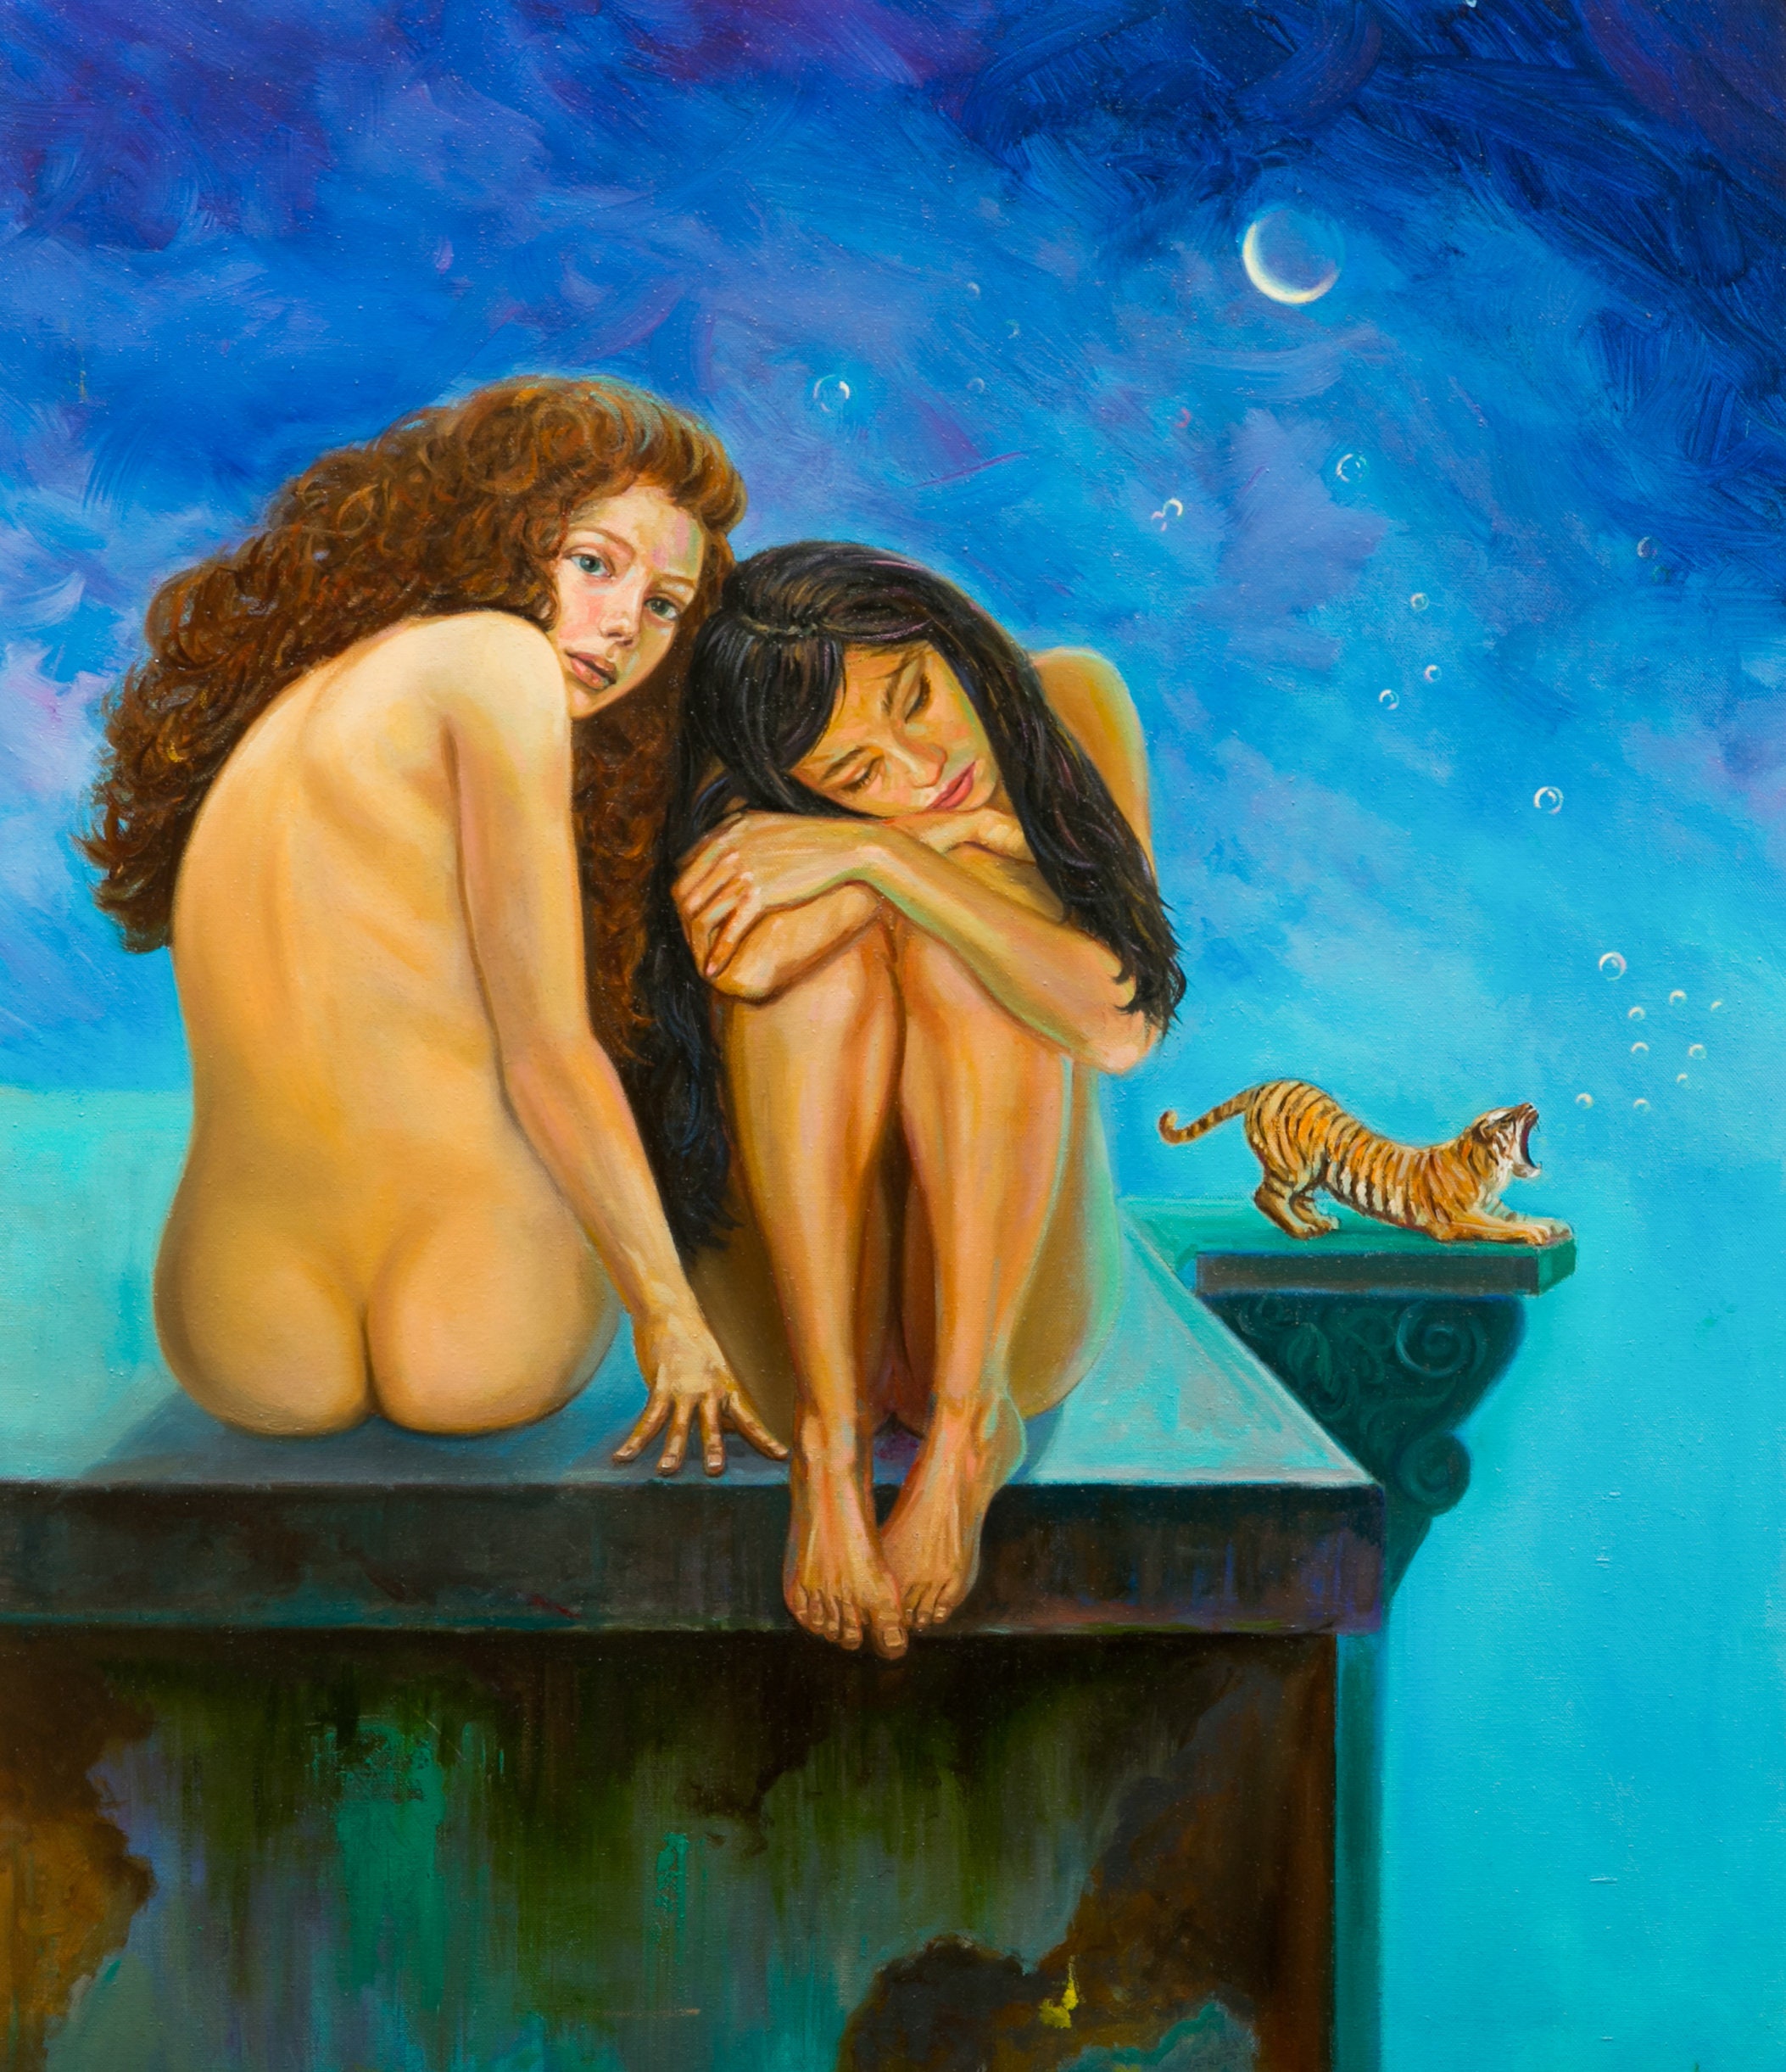 Nude Women Fantasy Oil Painting on Canvas Erotic Wall image